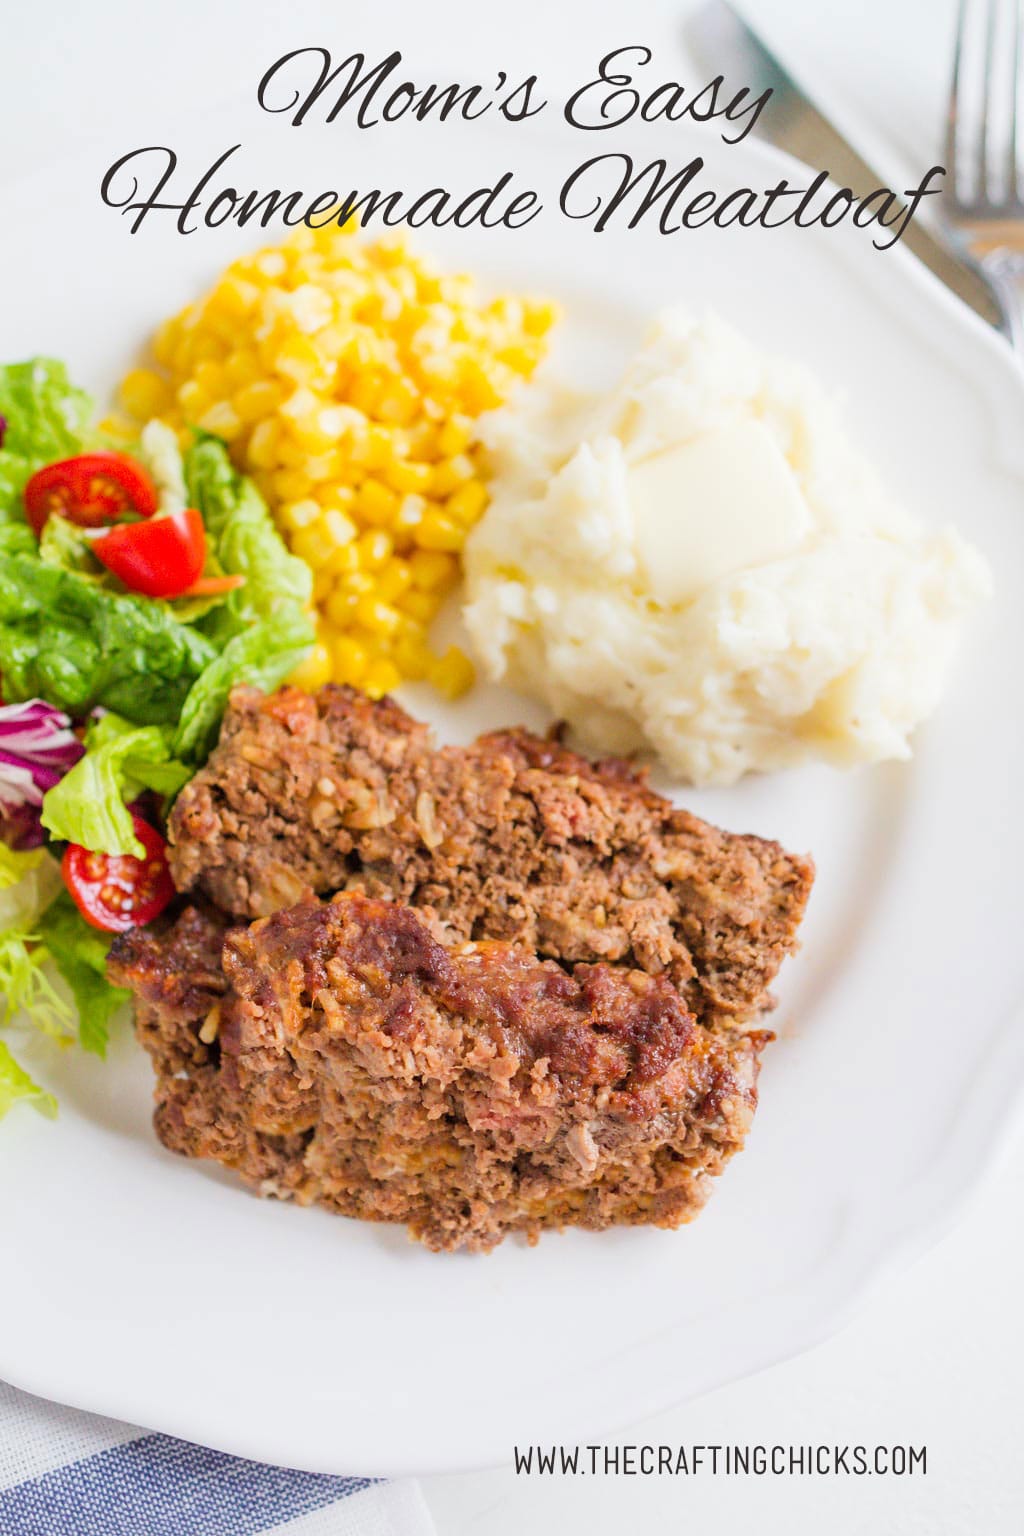 Mom's Easy Homemade Meatloaf Recipe is a great addition to any meal plan. This hearty main dish will have your kids asking for more.